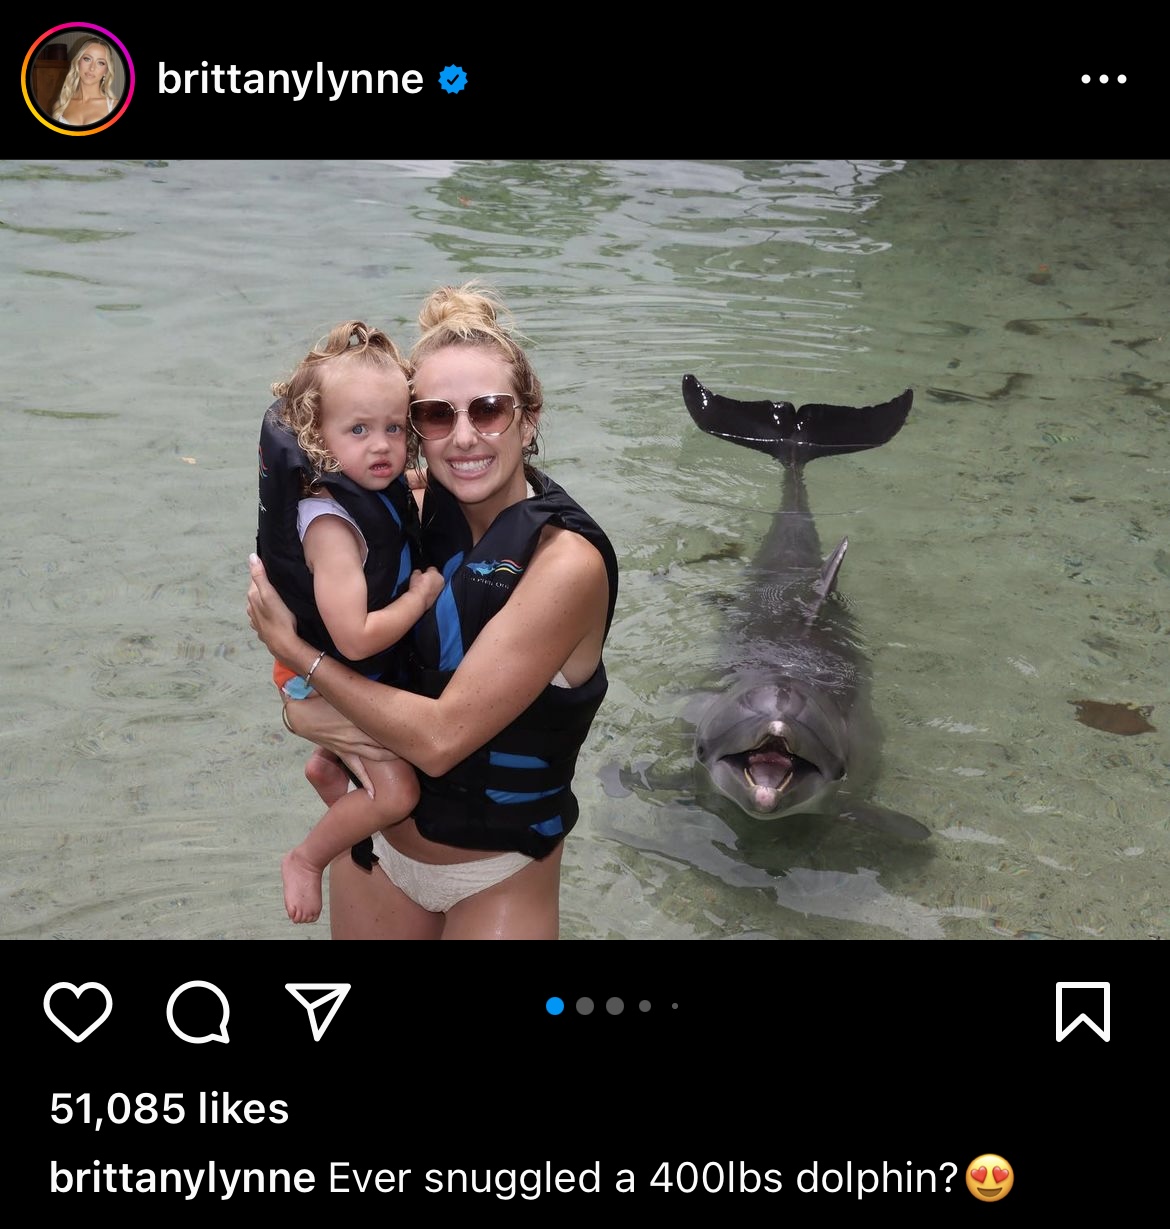 Chiefs QB Patrick Mahomes’ wife Brittany faces intense backlash for posting photos with her baby featuring dolphins: “extremely disappointing Brit”